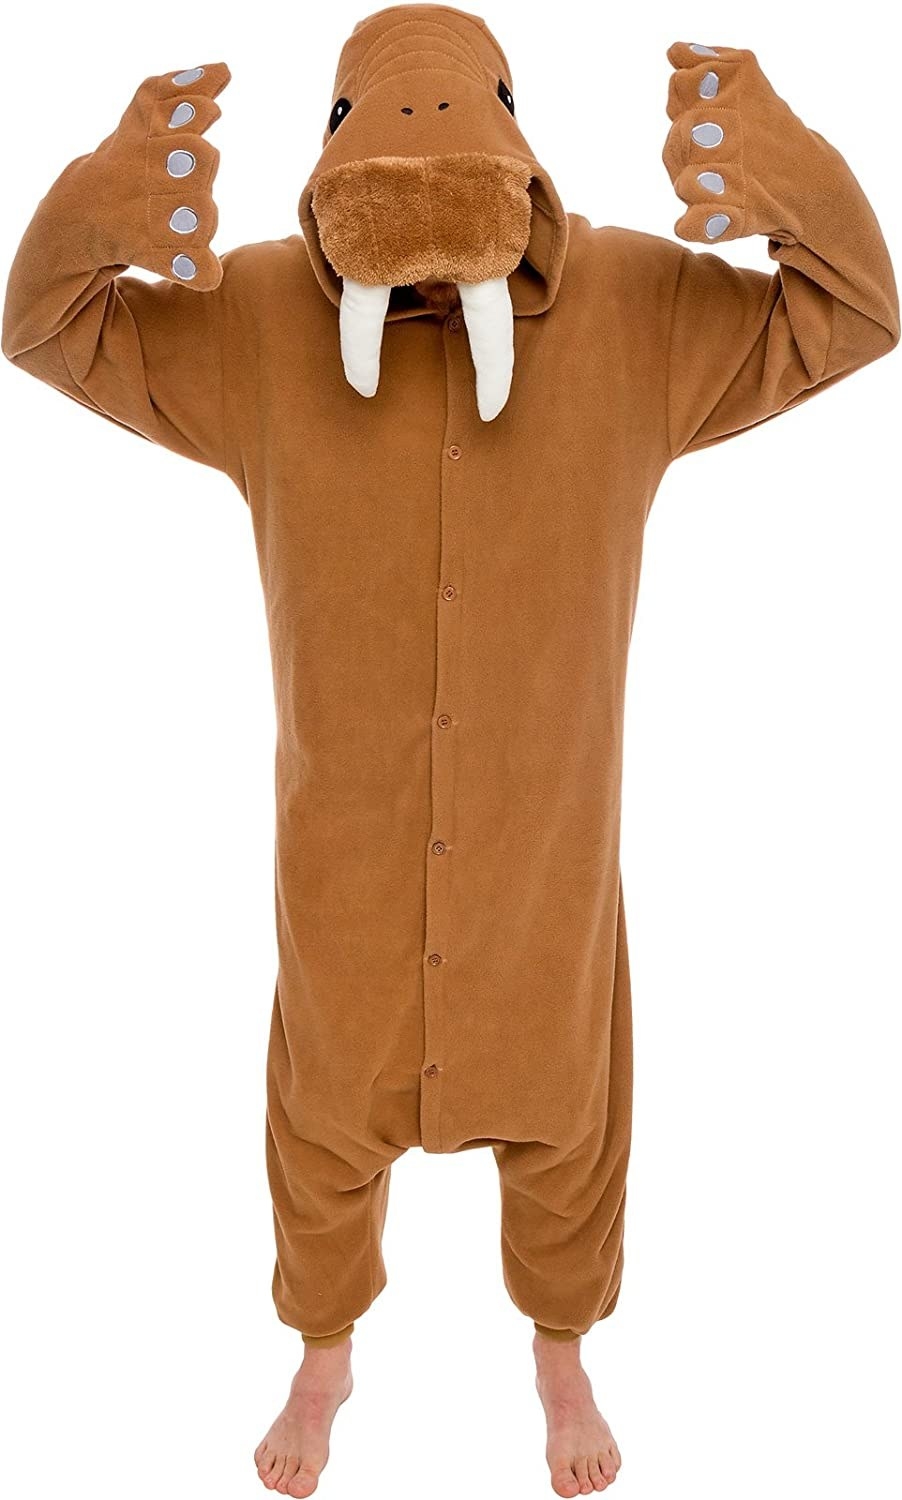 A person wearing the Walrus shaped onesie